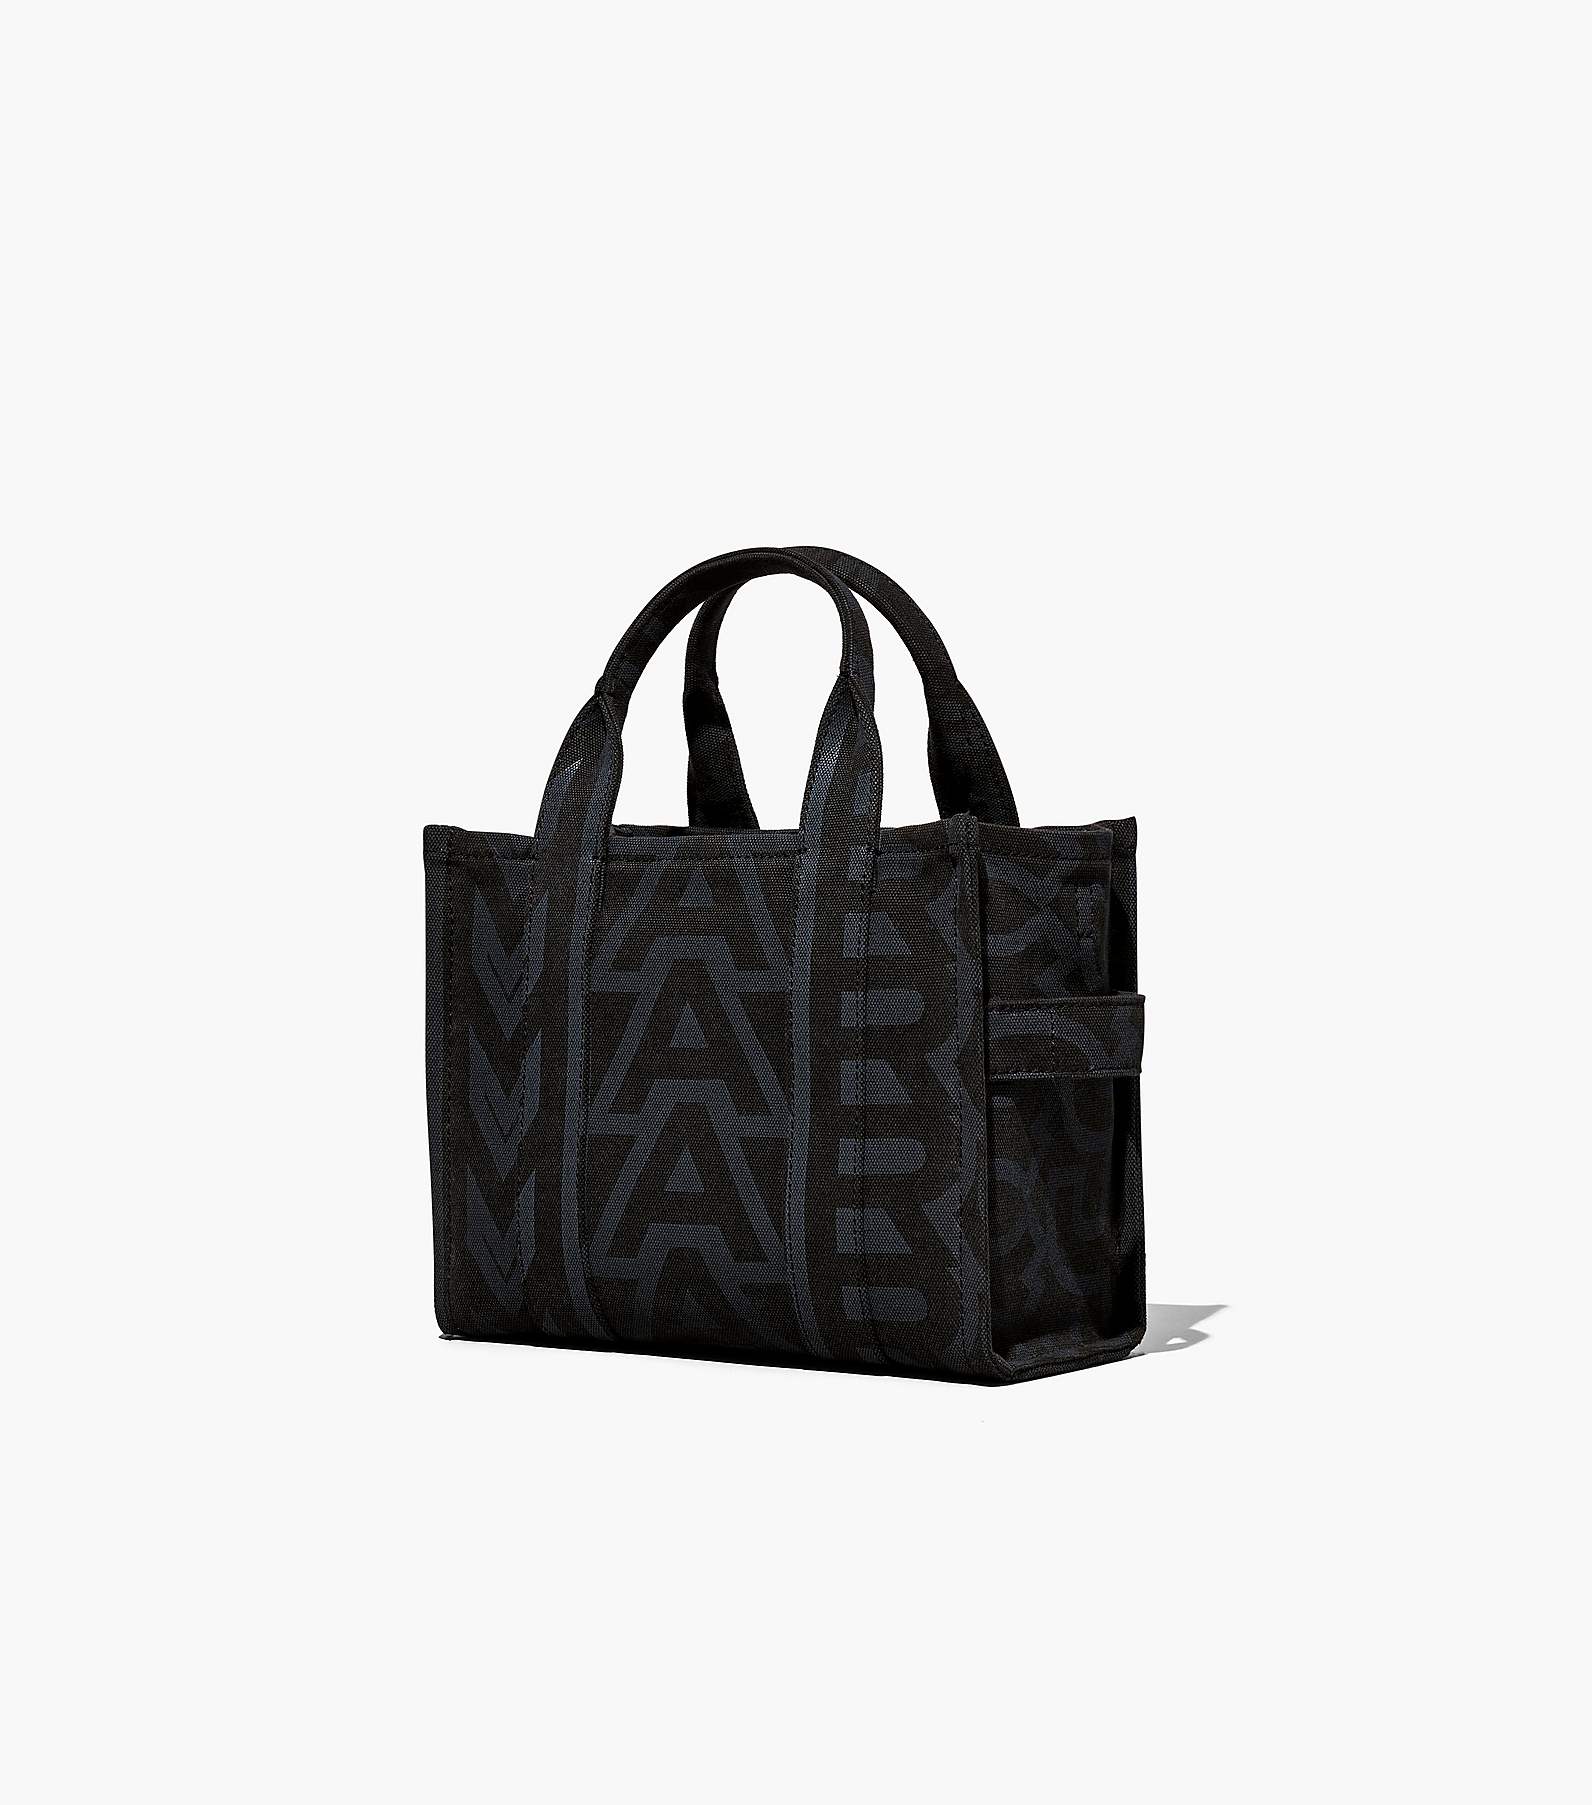 The Outline Monogram Small Tote Bag